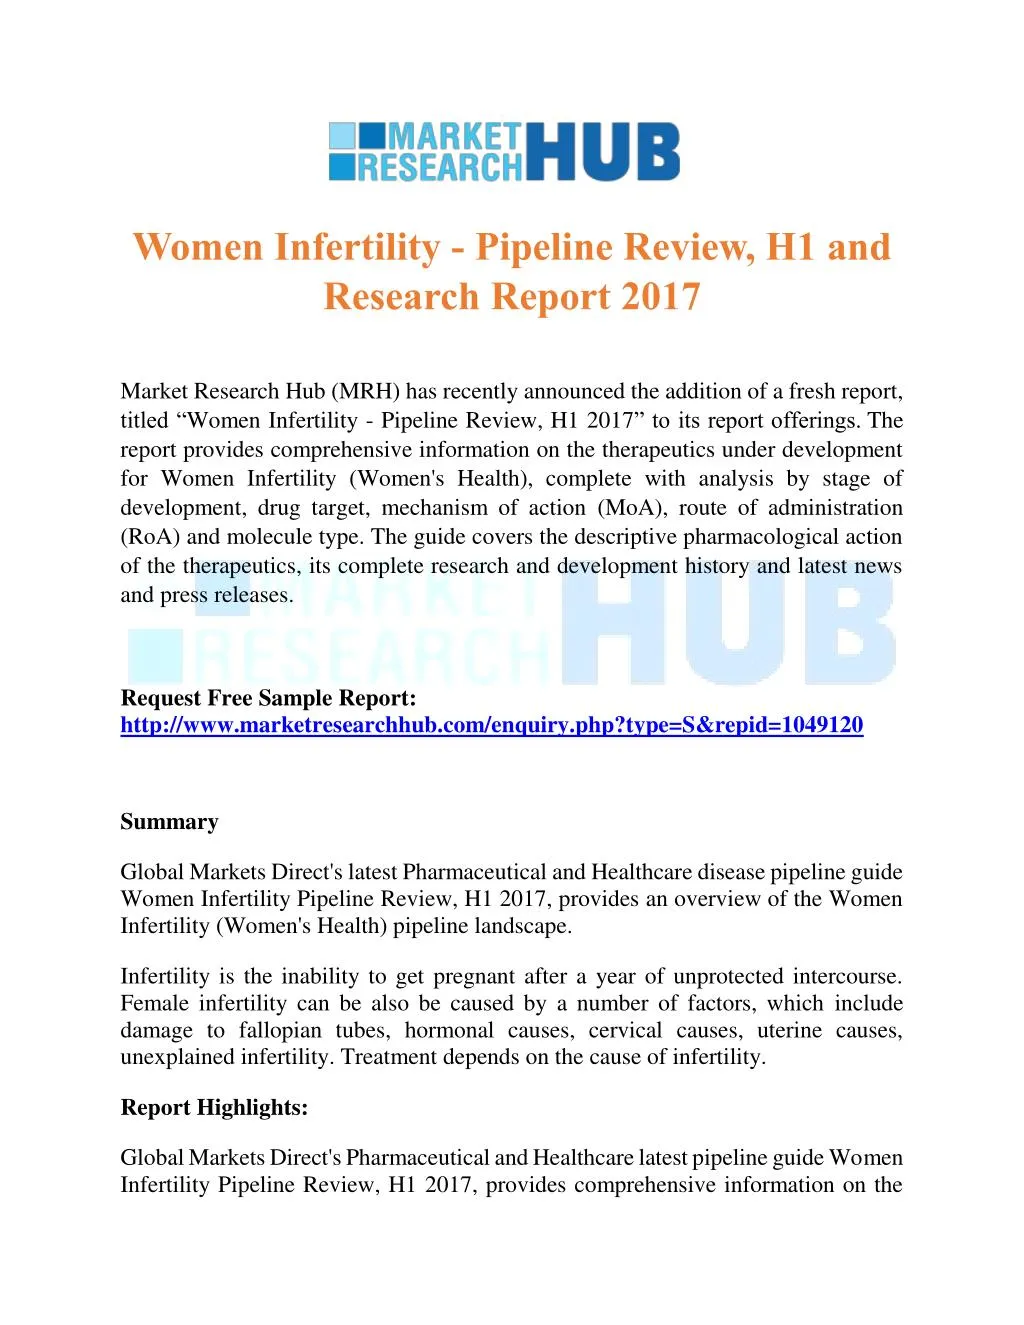 women infertility pipeline review h1 and research